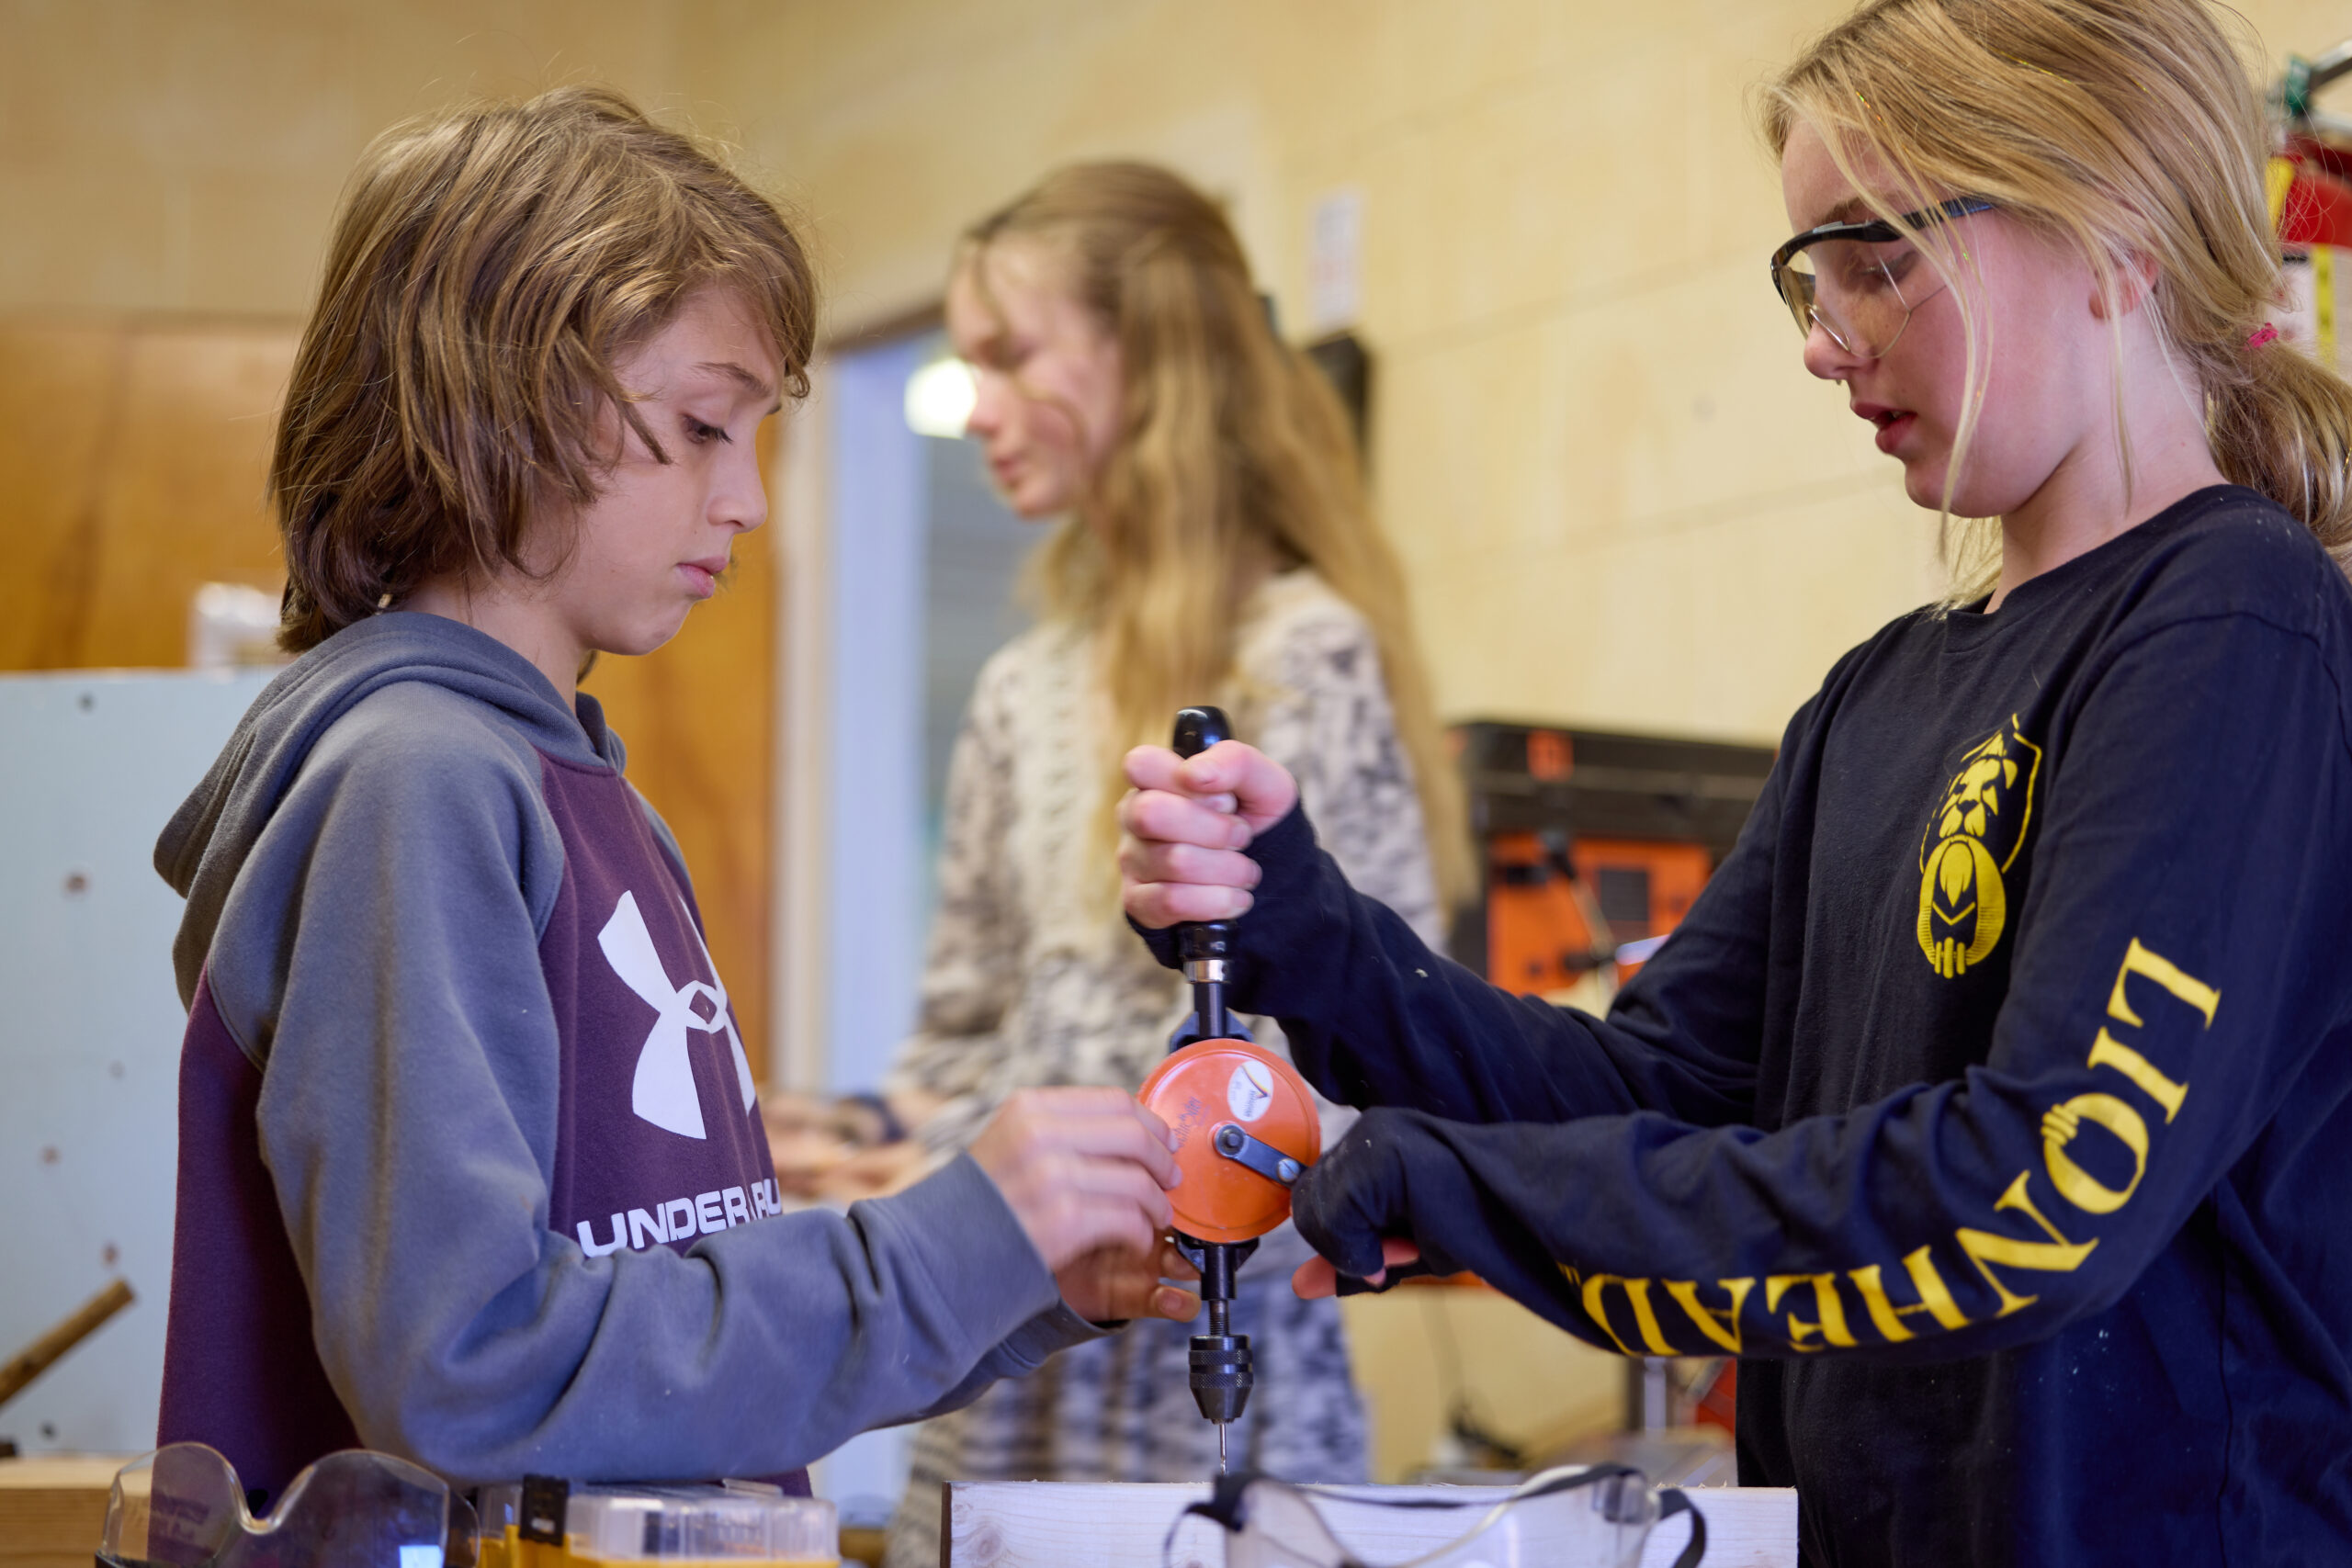 Woodworking class teaches middle schoolers a craft while applying math, problem solving, and an artistic touch.